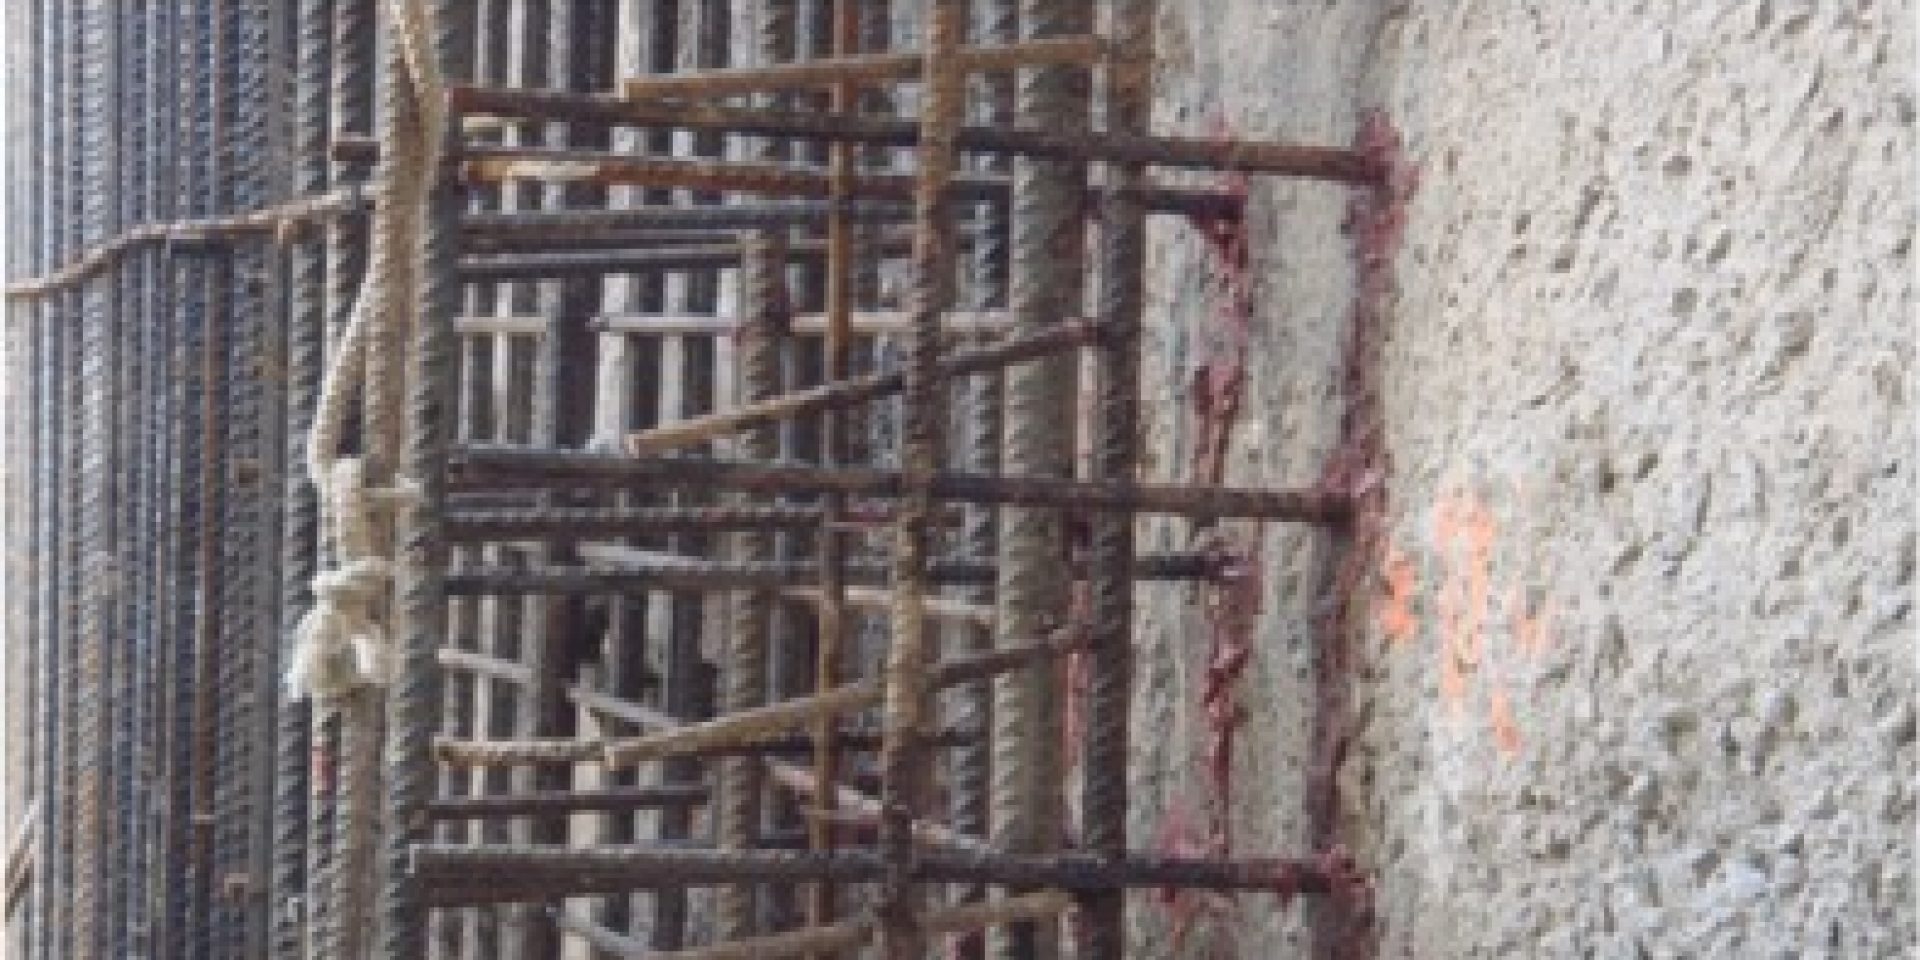 Hilti post installed rebar wall to wall connection